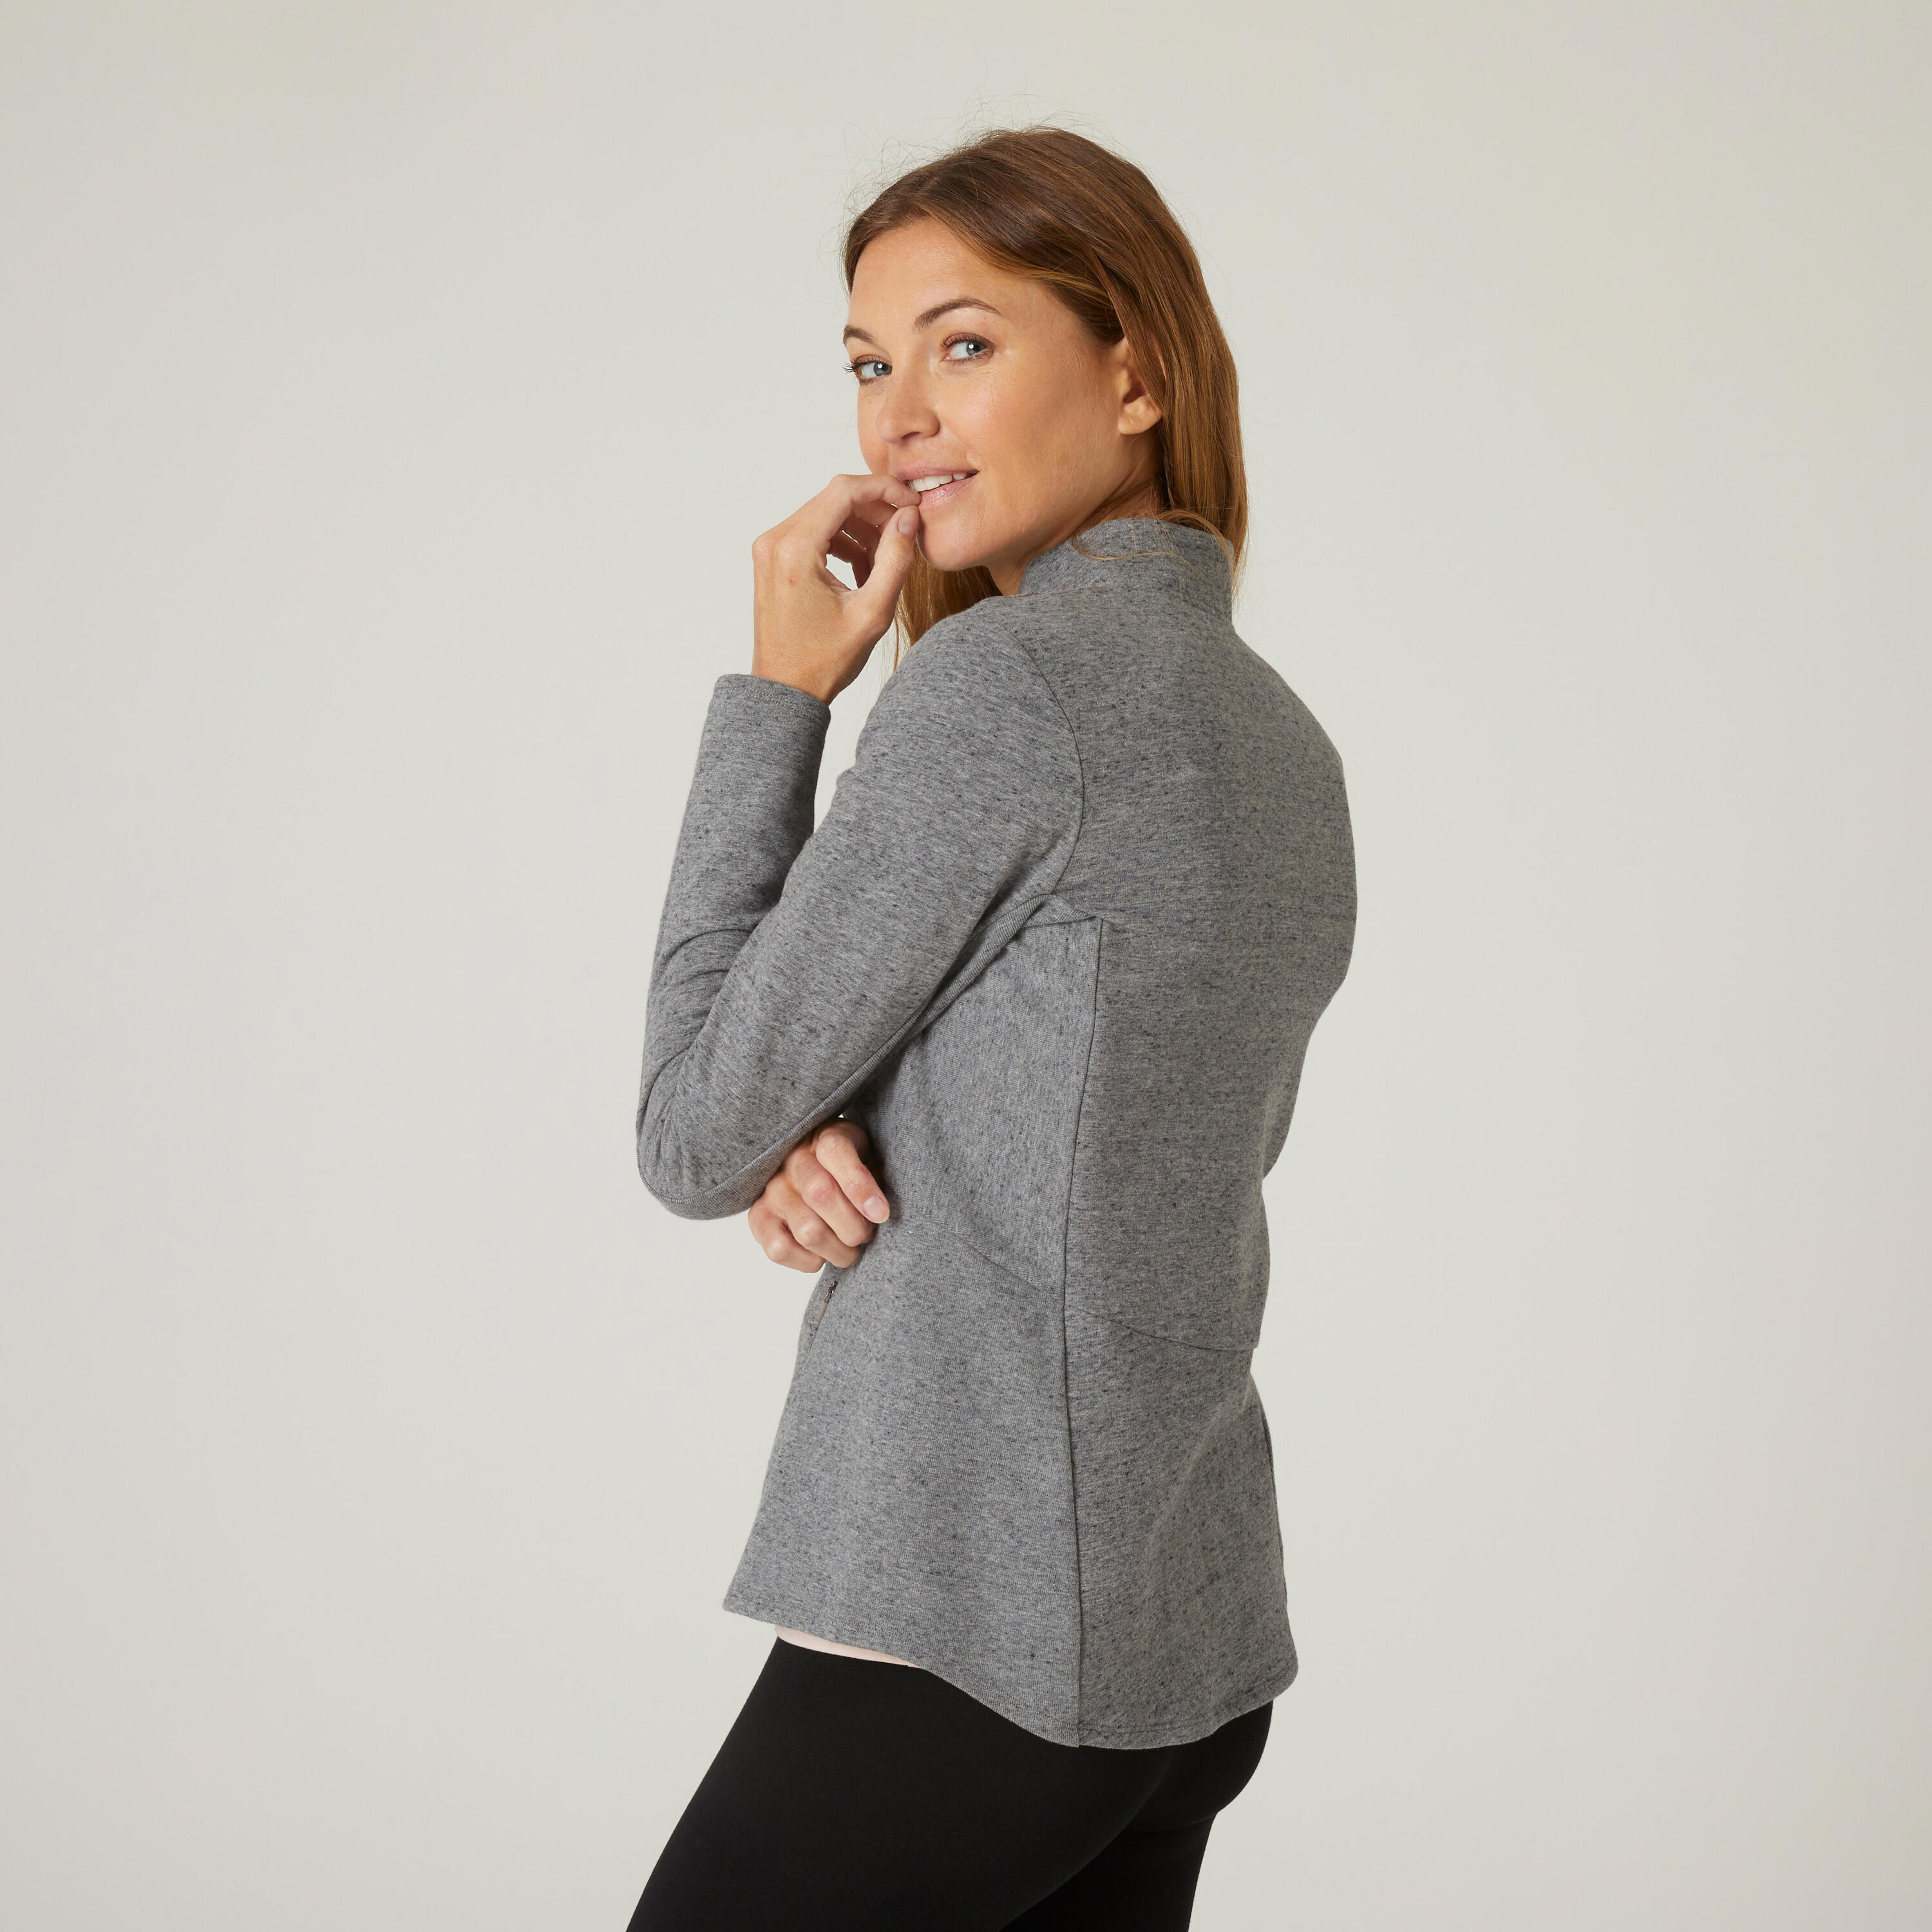 Women's Fitted High Neck Zipped Sweatshirt With Pocket 520 - Grey 2/7